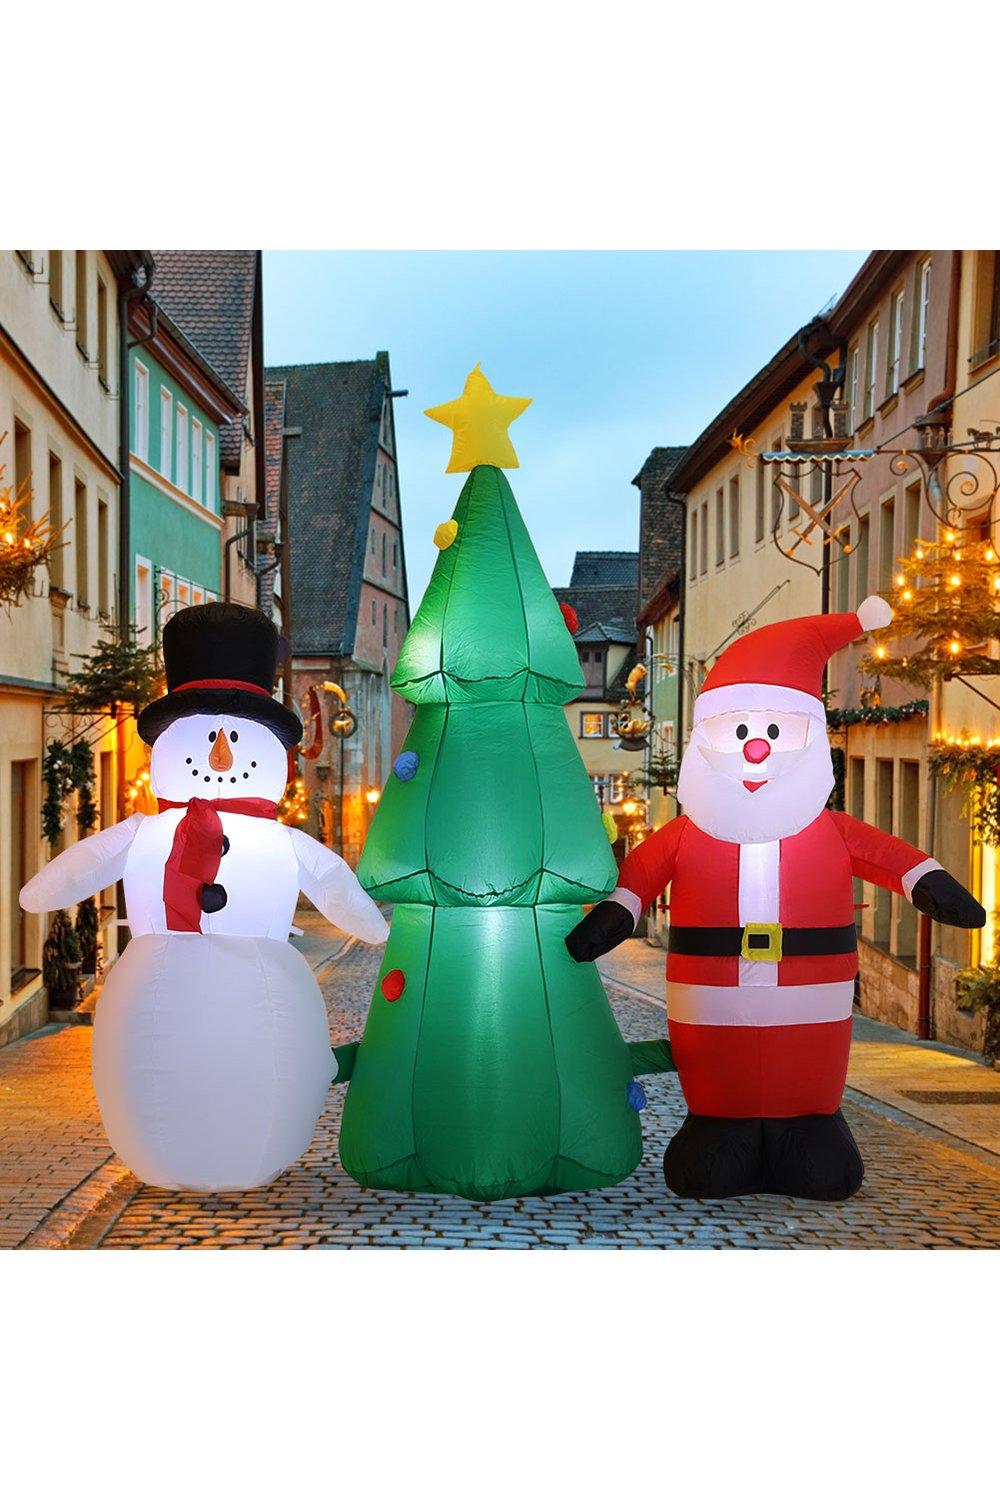 180cm Tall Christmas Inflatable Santa Claus Snowman Christmas Tree with Fan and LED Christmas Air Bl